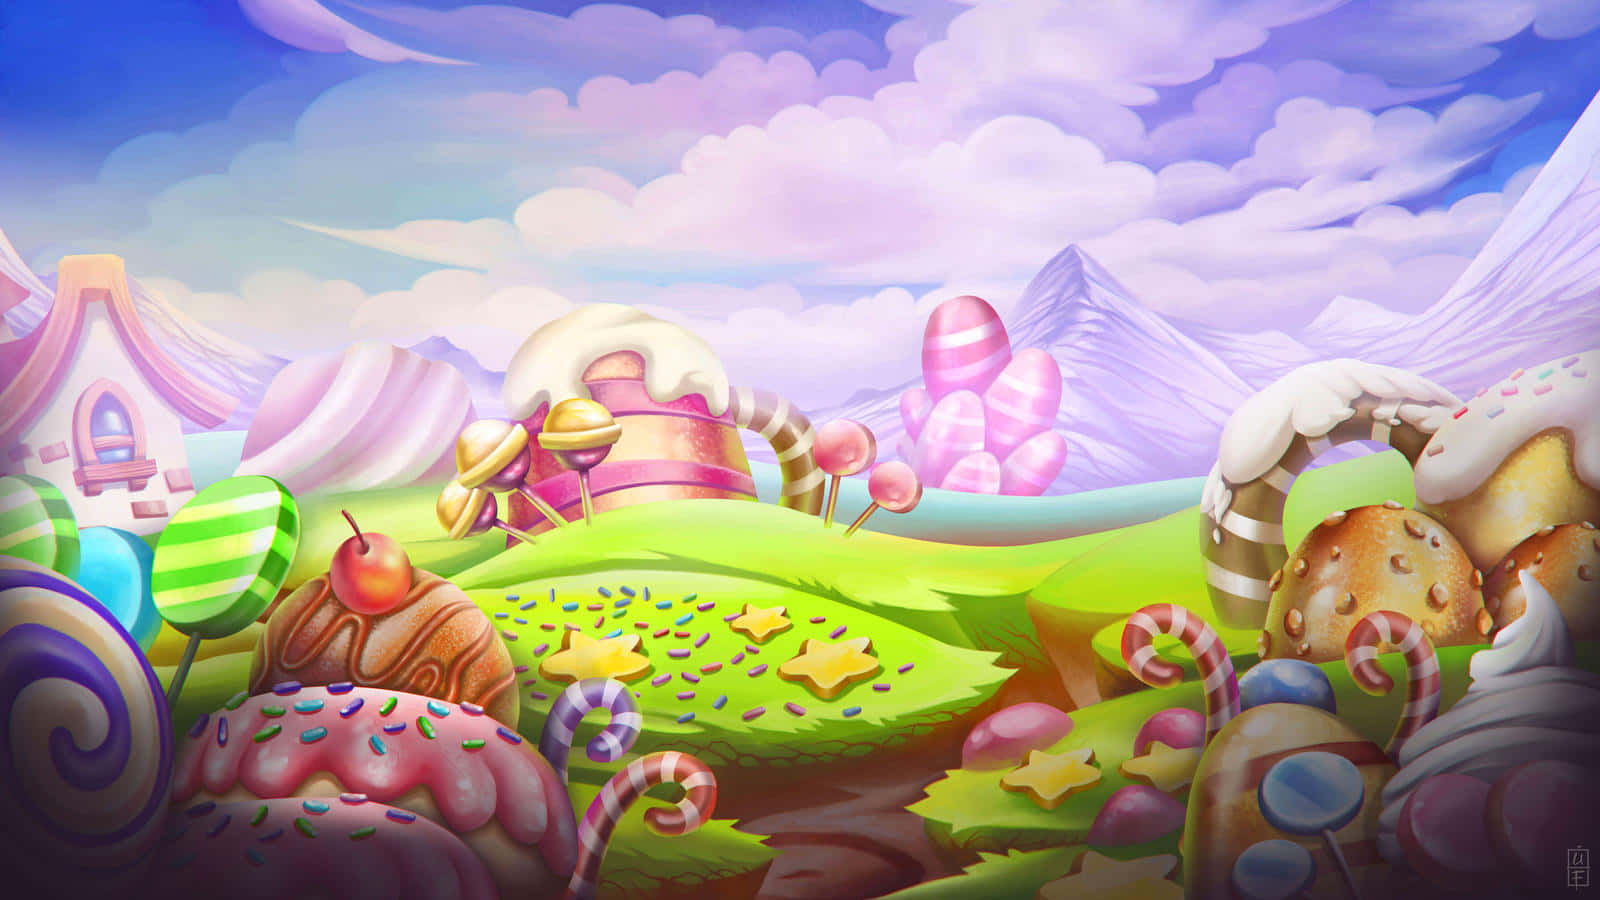 A Cartoon Landscape With Candy Canes And Candy